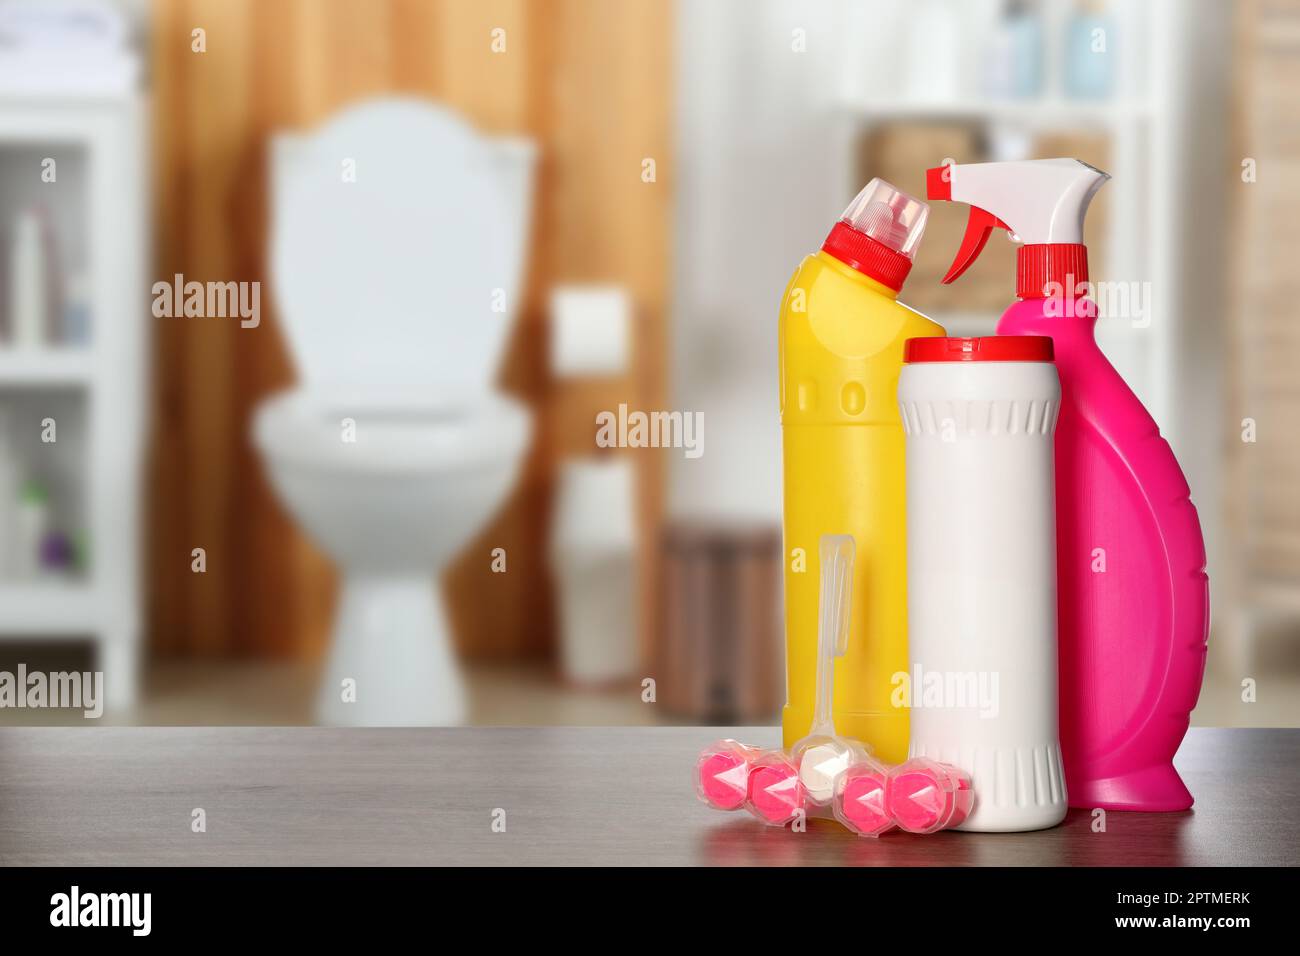 https://c8.alamy.com/comp/2PTMERK/different-toilet-cleaning-supplies-on-wooden-table-in-bathroom-space-for-text-2PTMERK.jpg